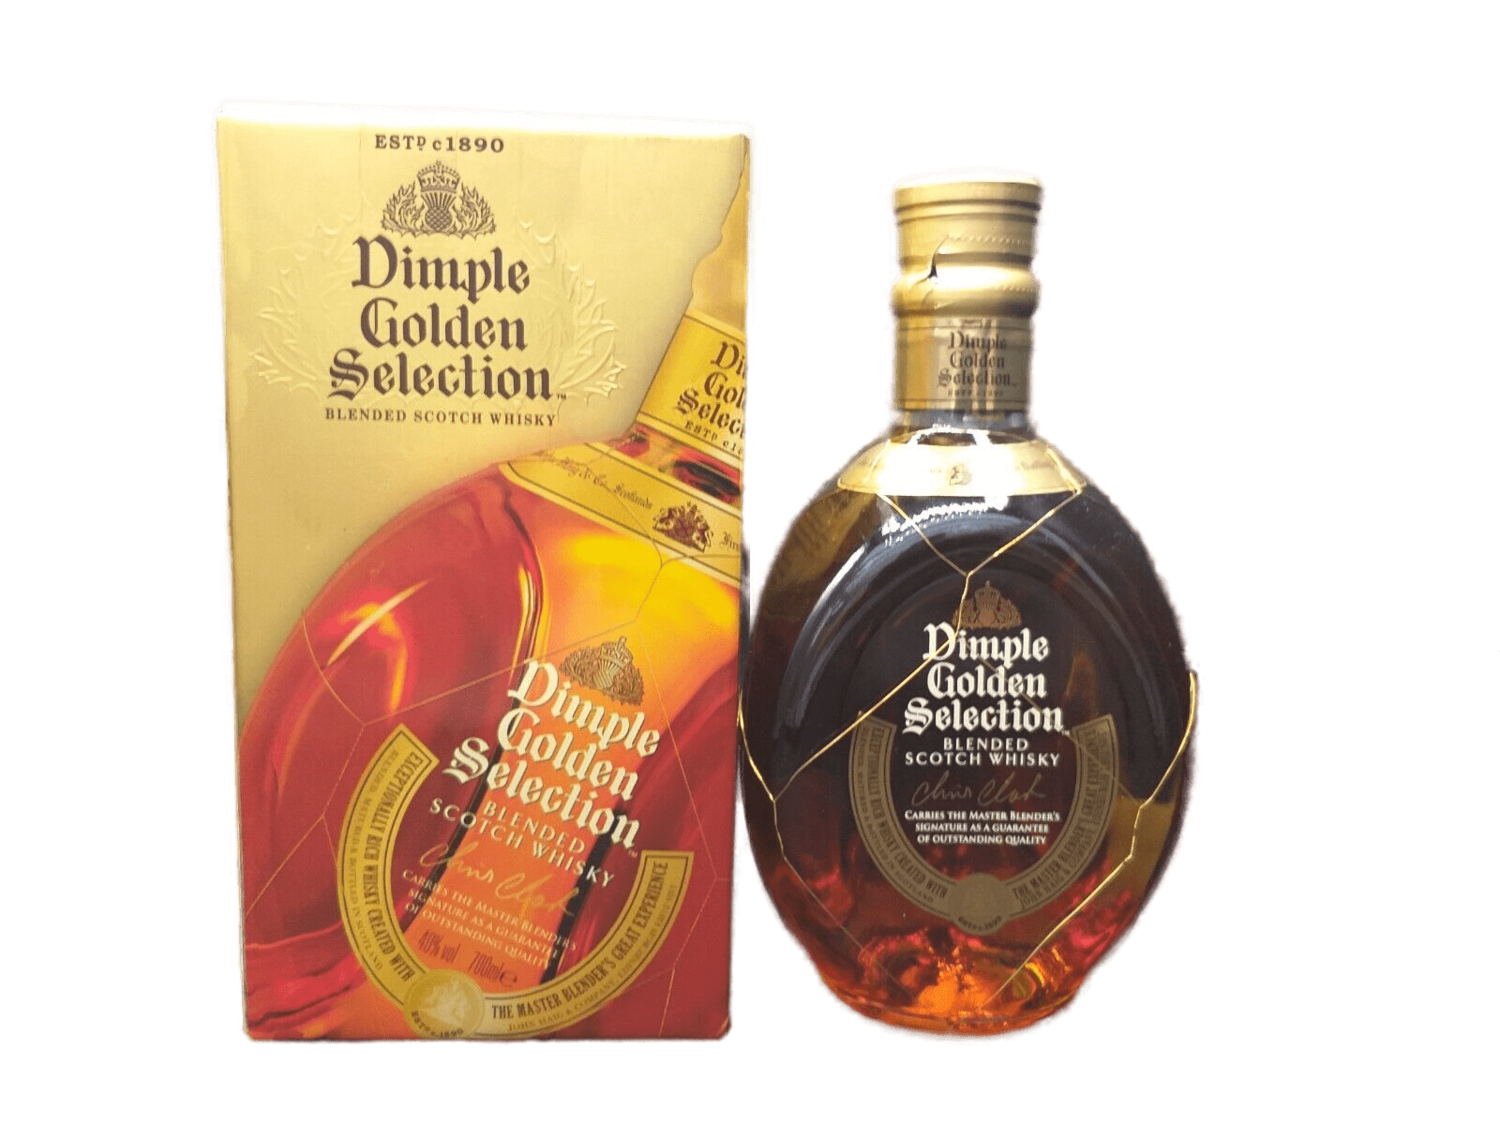 Dimple Golden Selection Blended Scotch Whsiky Scotland 40% VOL. (1x0,7ltr.)  OVP